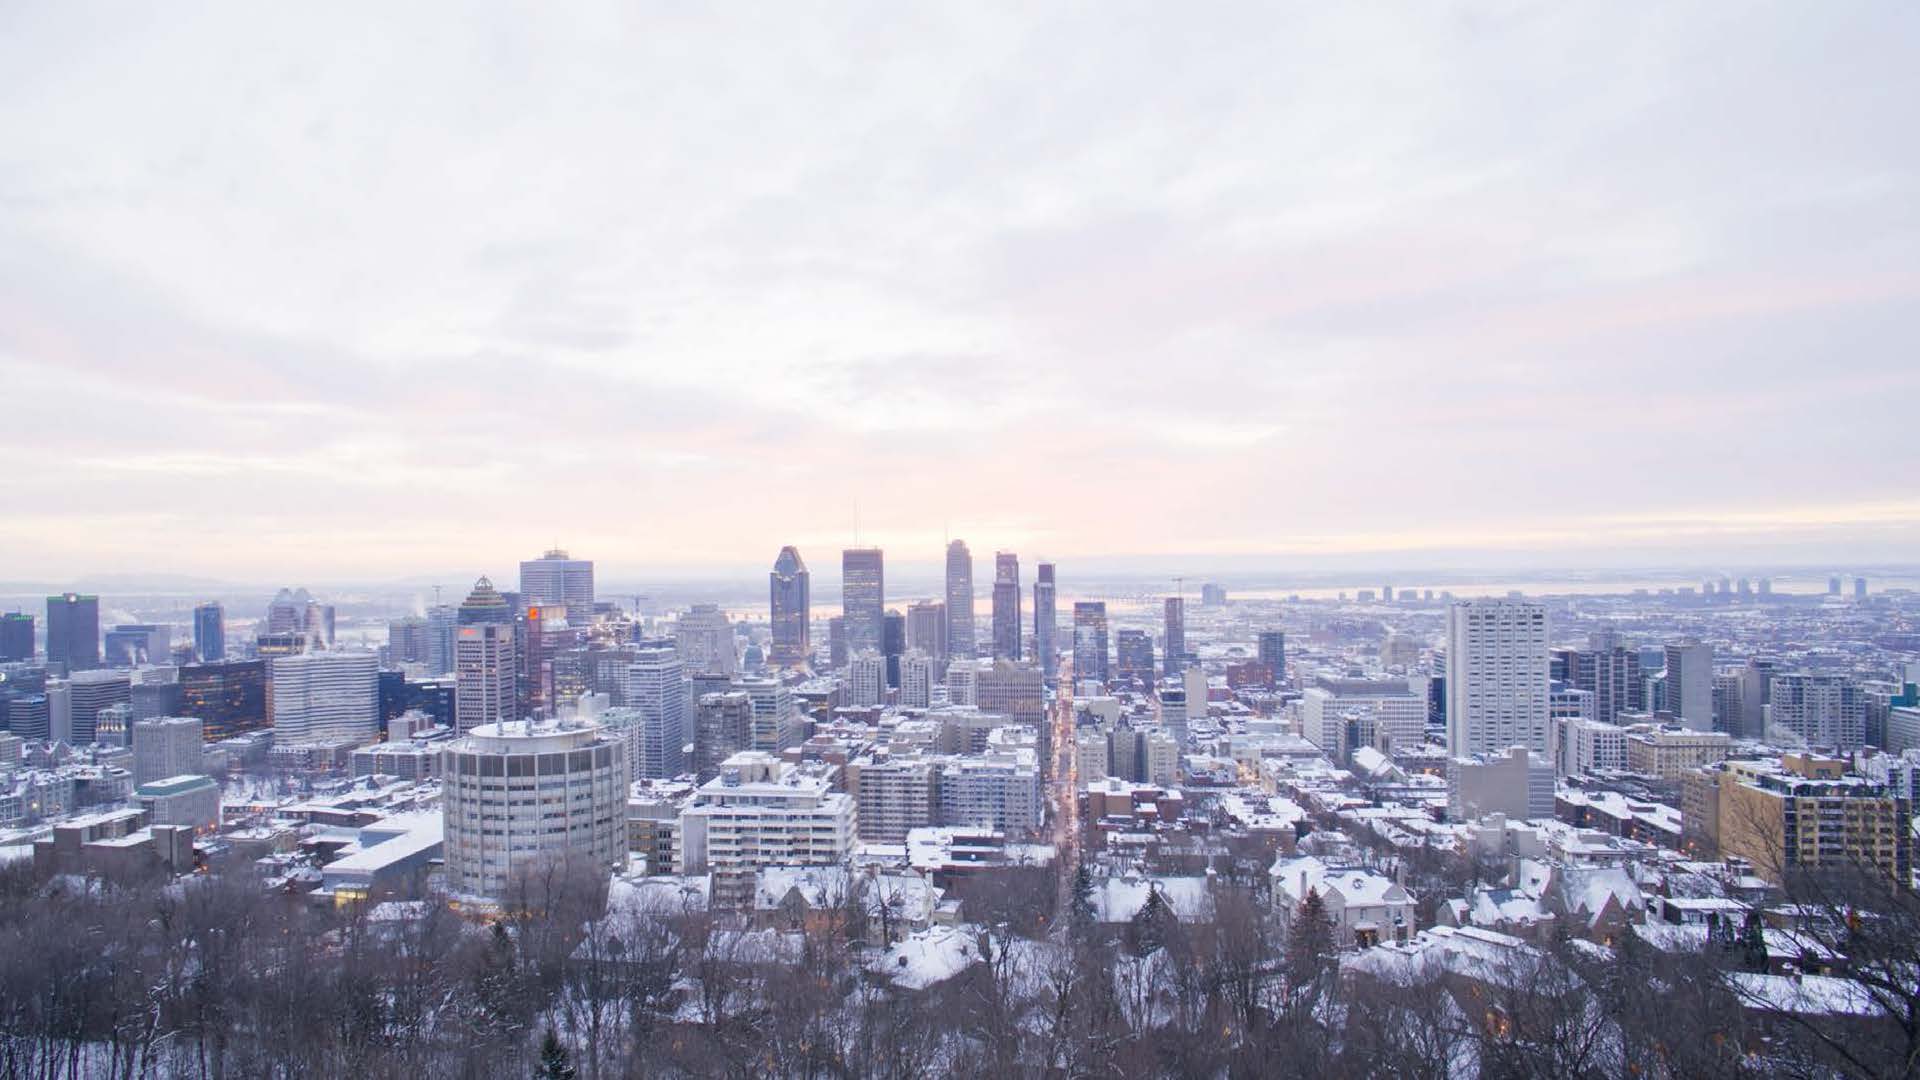 A snowy image of the city of Montreal at dusk.